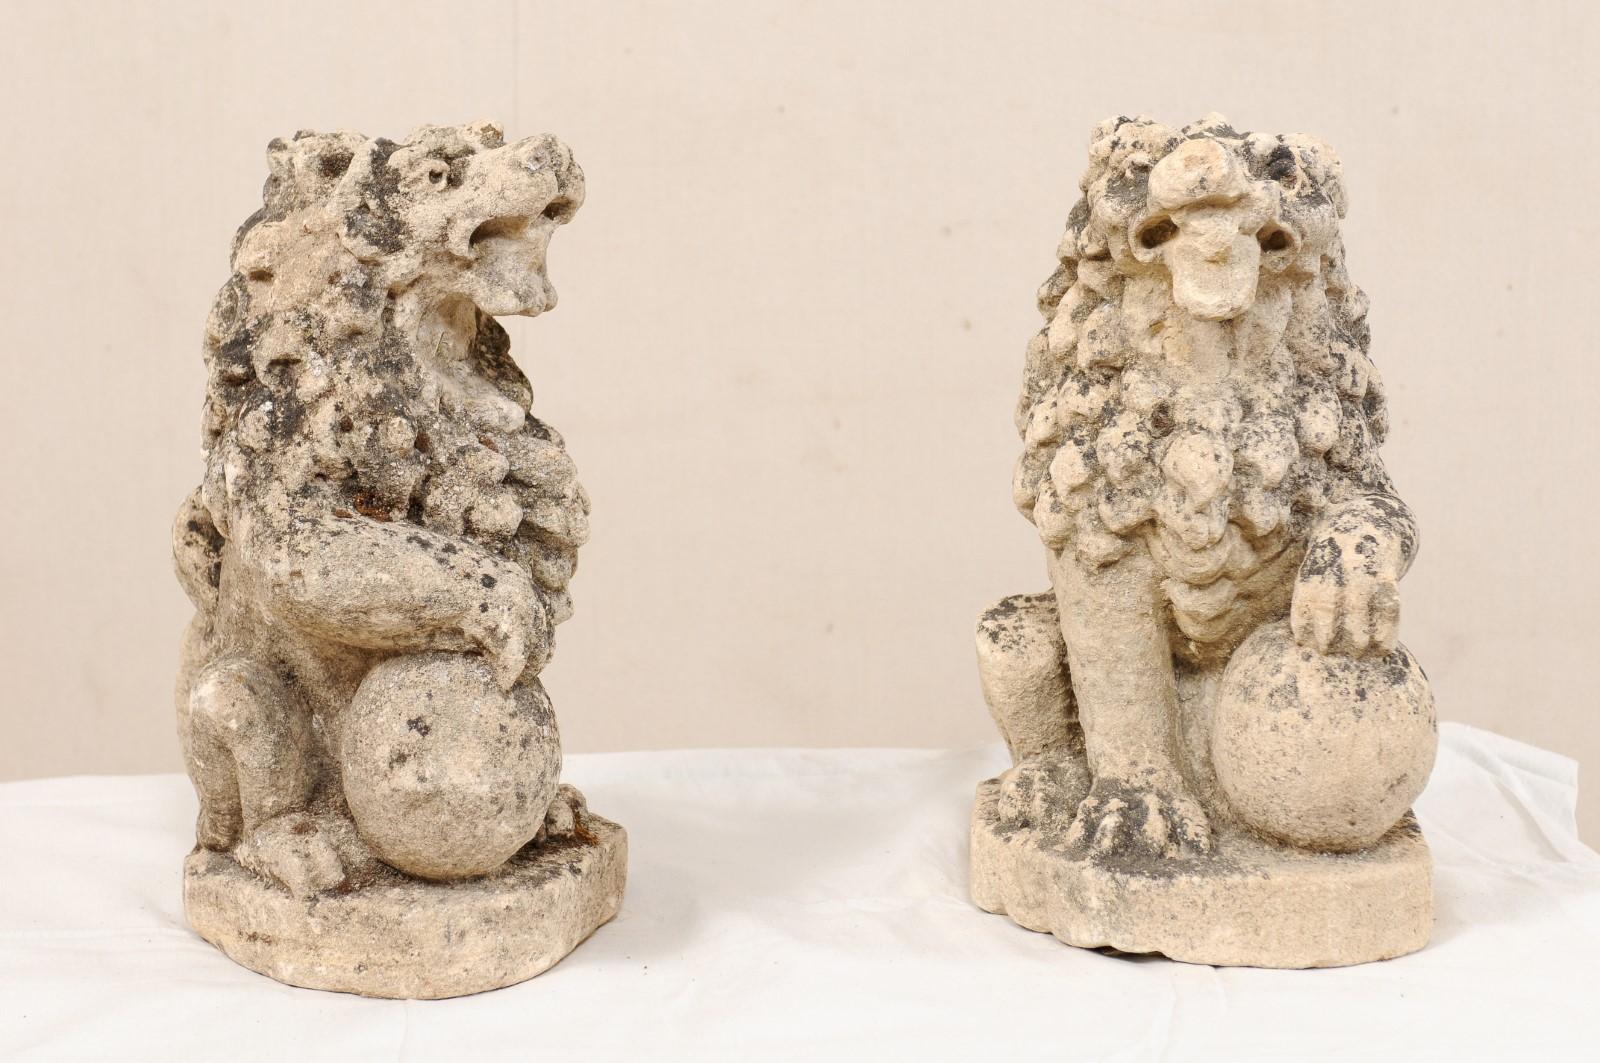 A pair of 19th century English lions from carved limestone. This antique pair of stone lions from England are each shown in seated position with a single front leg or paw raised atop a ball. This pair of lions have gorgeous, full manes of hair and